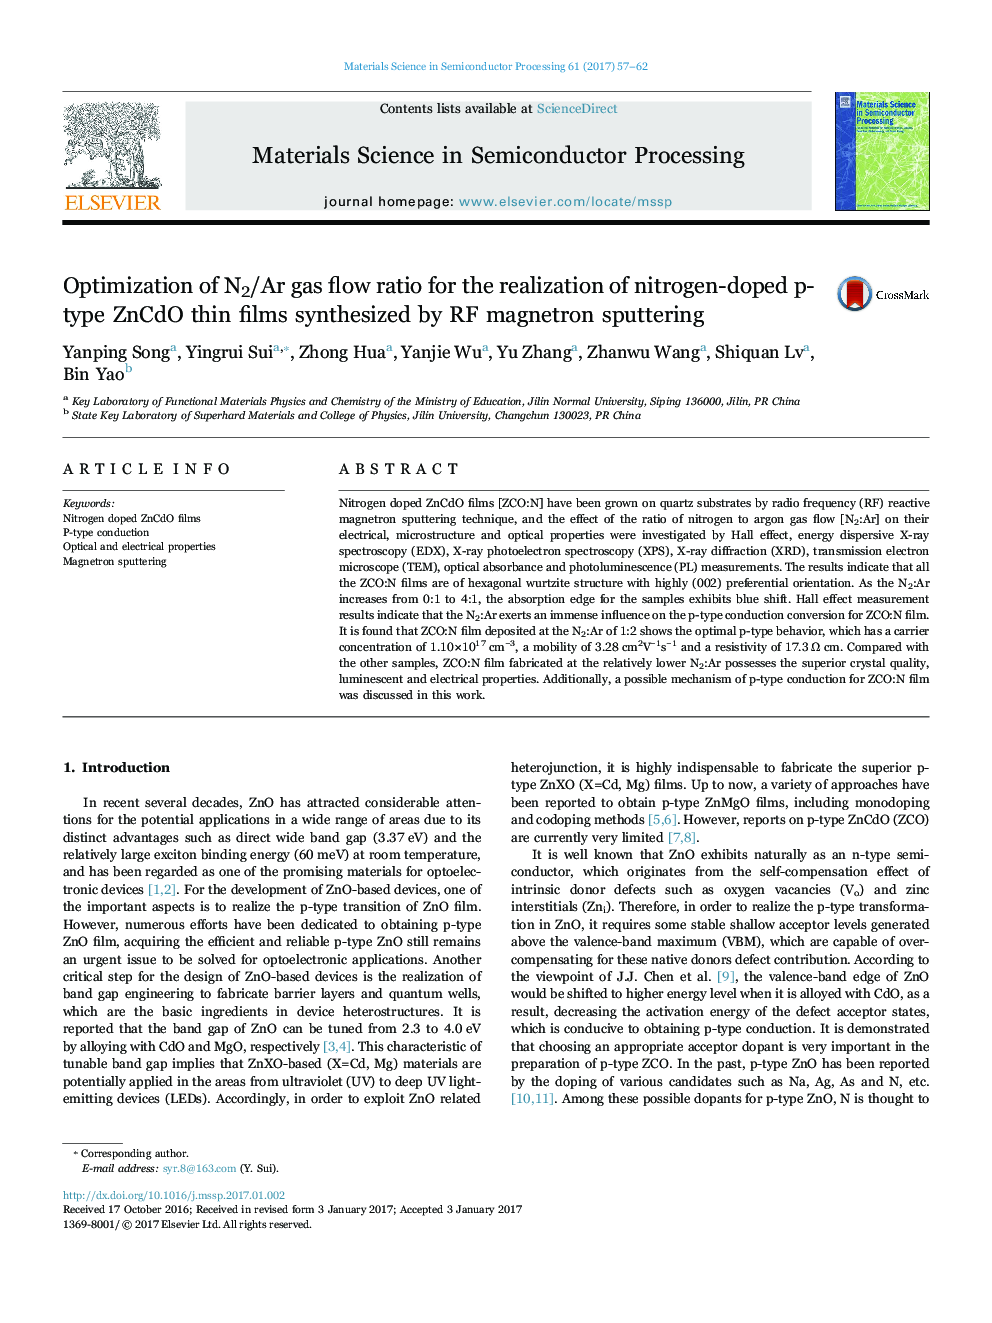 Optimization of N2/Ar gas flow ratio for the realization of nitrogen-doped p-type ZnCdO thin films synthesized by RF magnetron sputtering